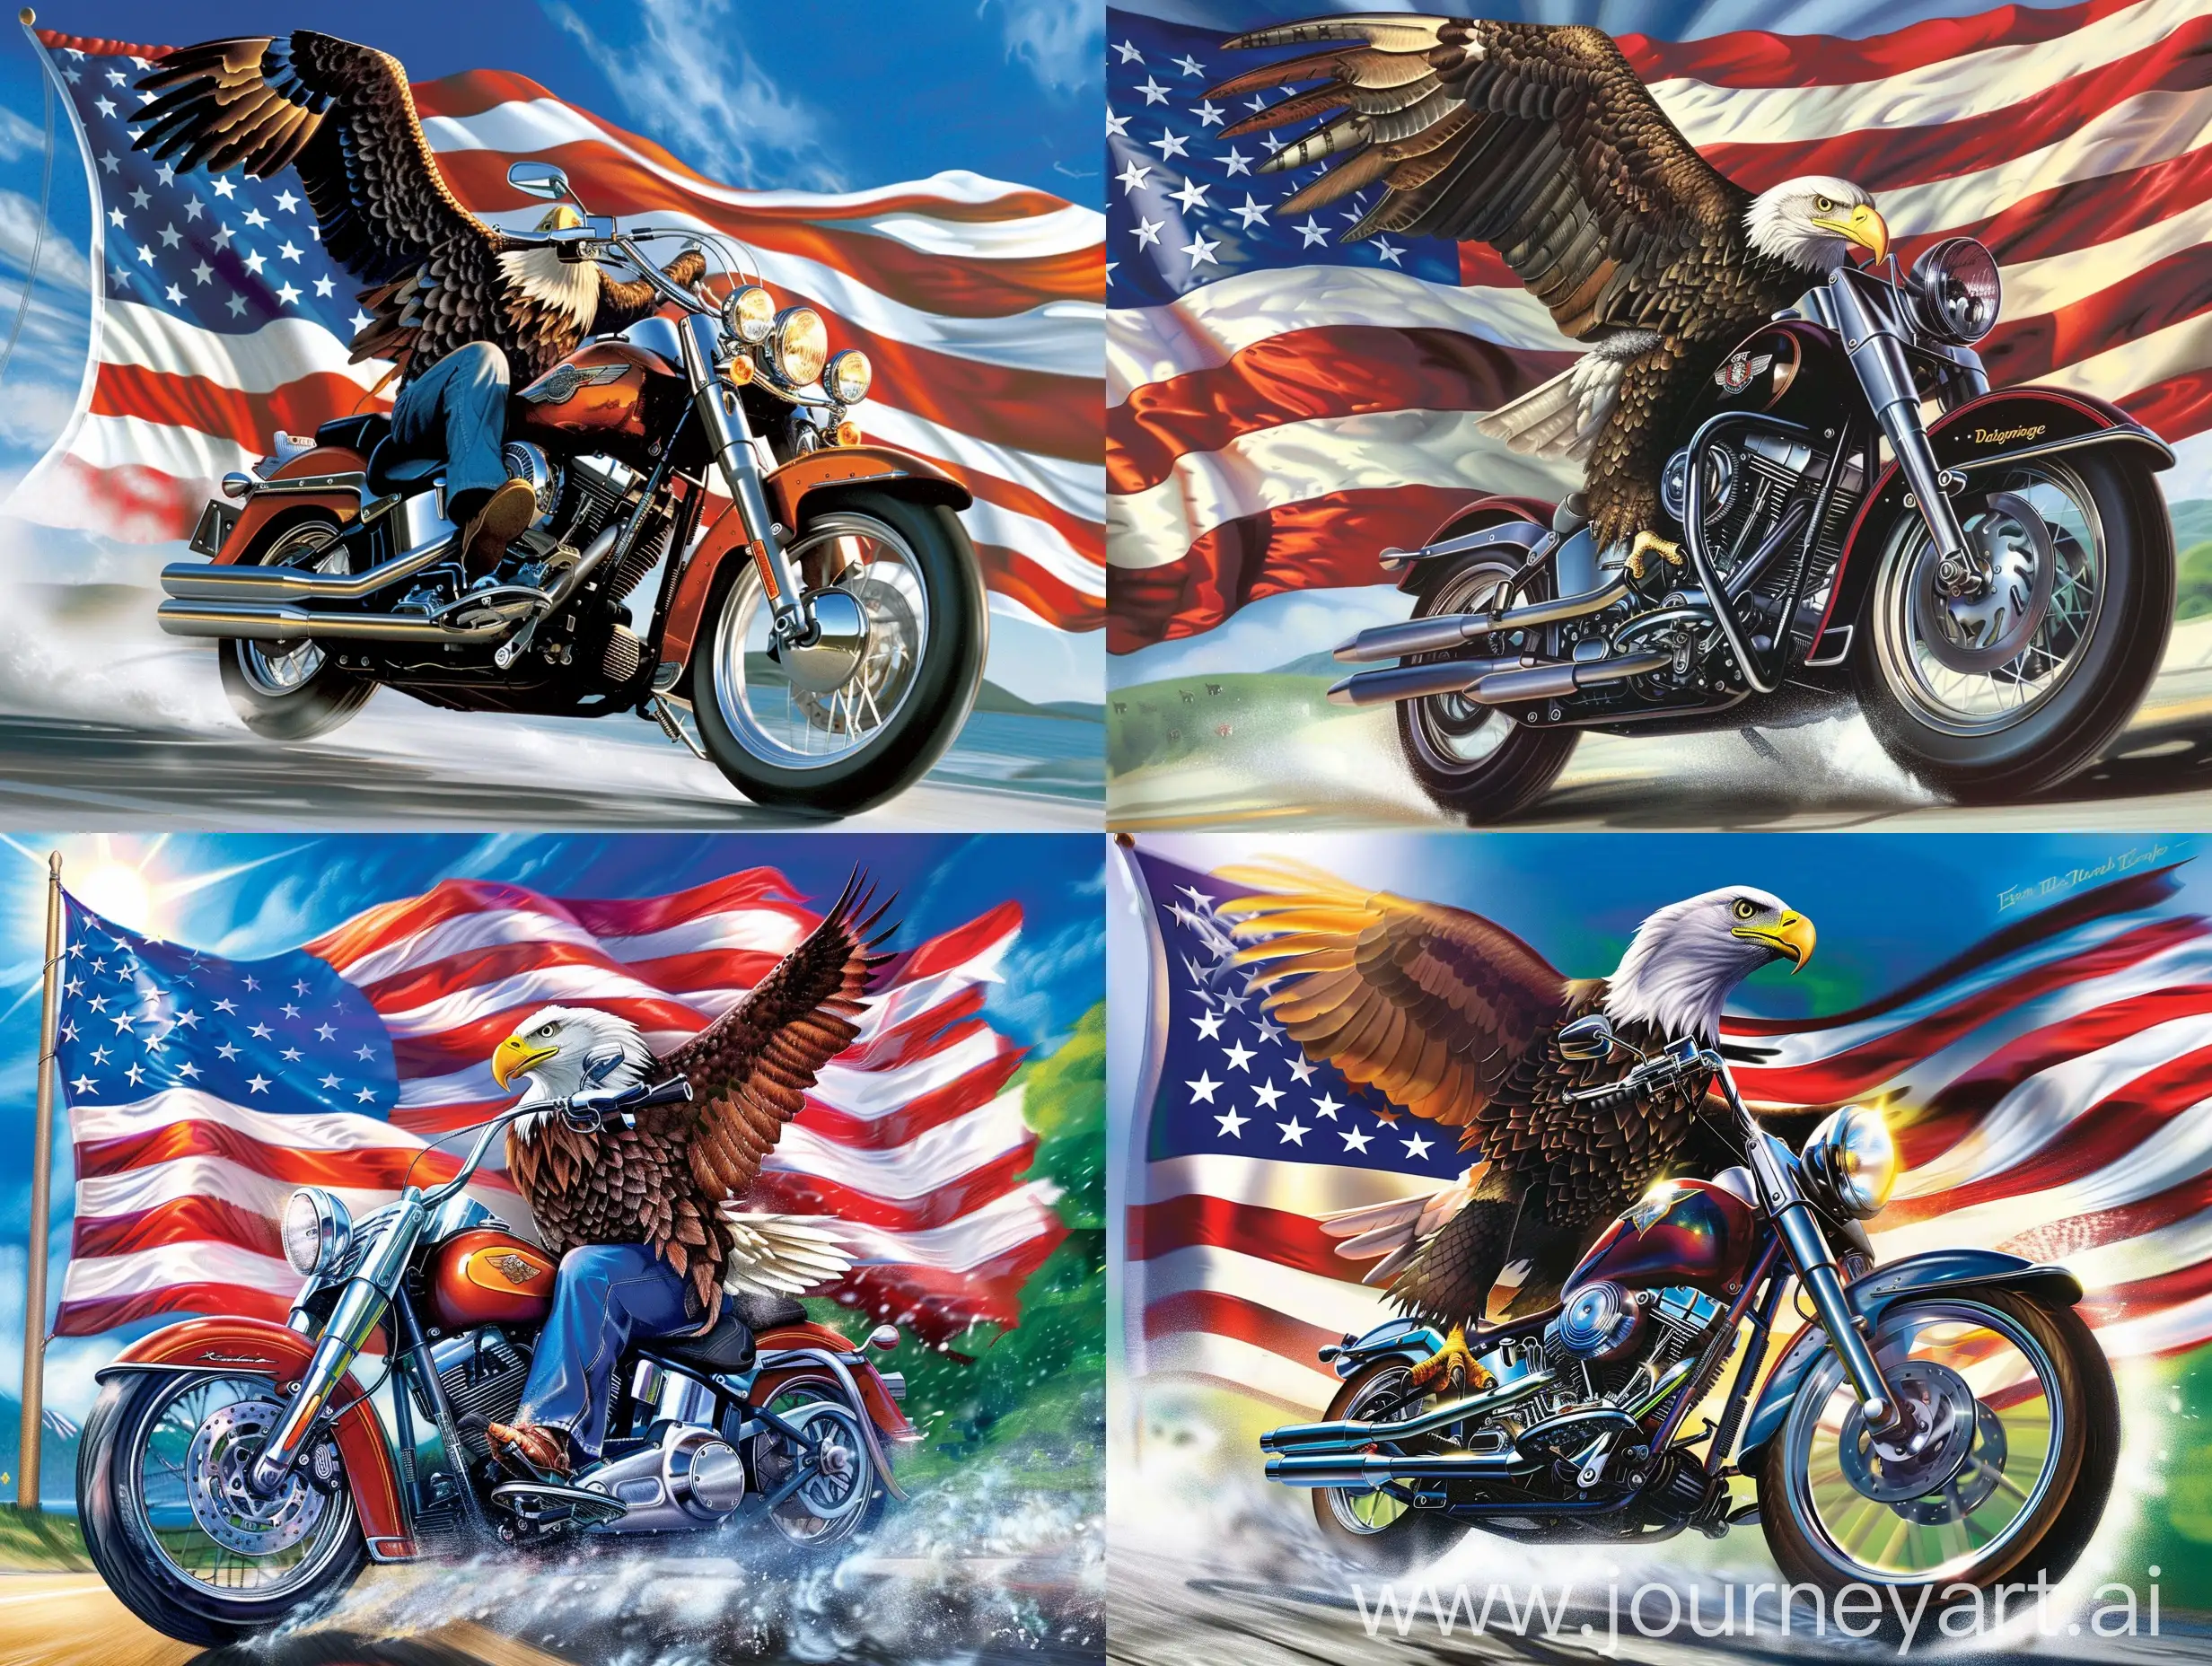 big eagle riding a harley Davidson motorcycle with a large American flag flowing in the background  with a bright blue sky